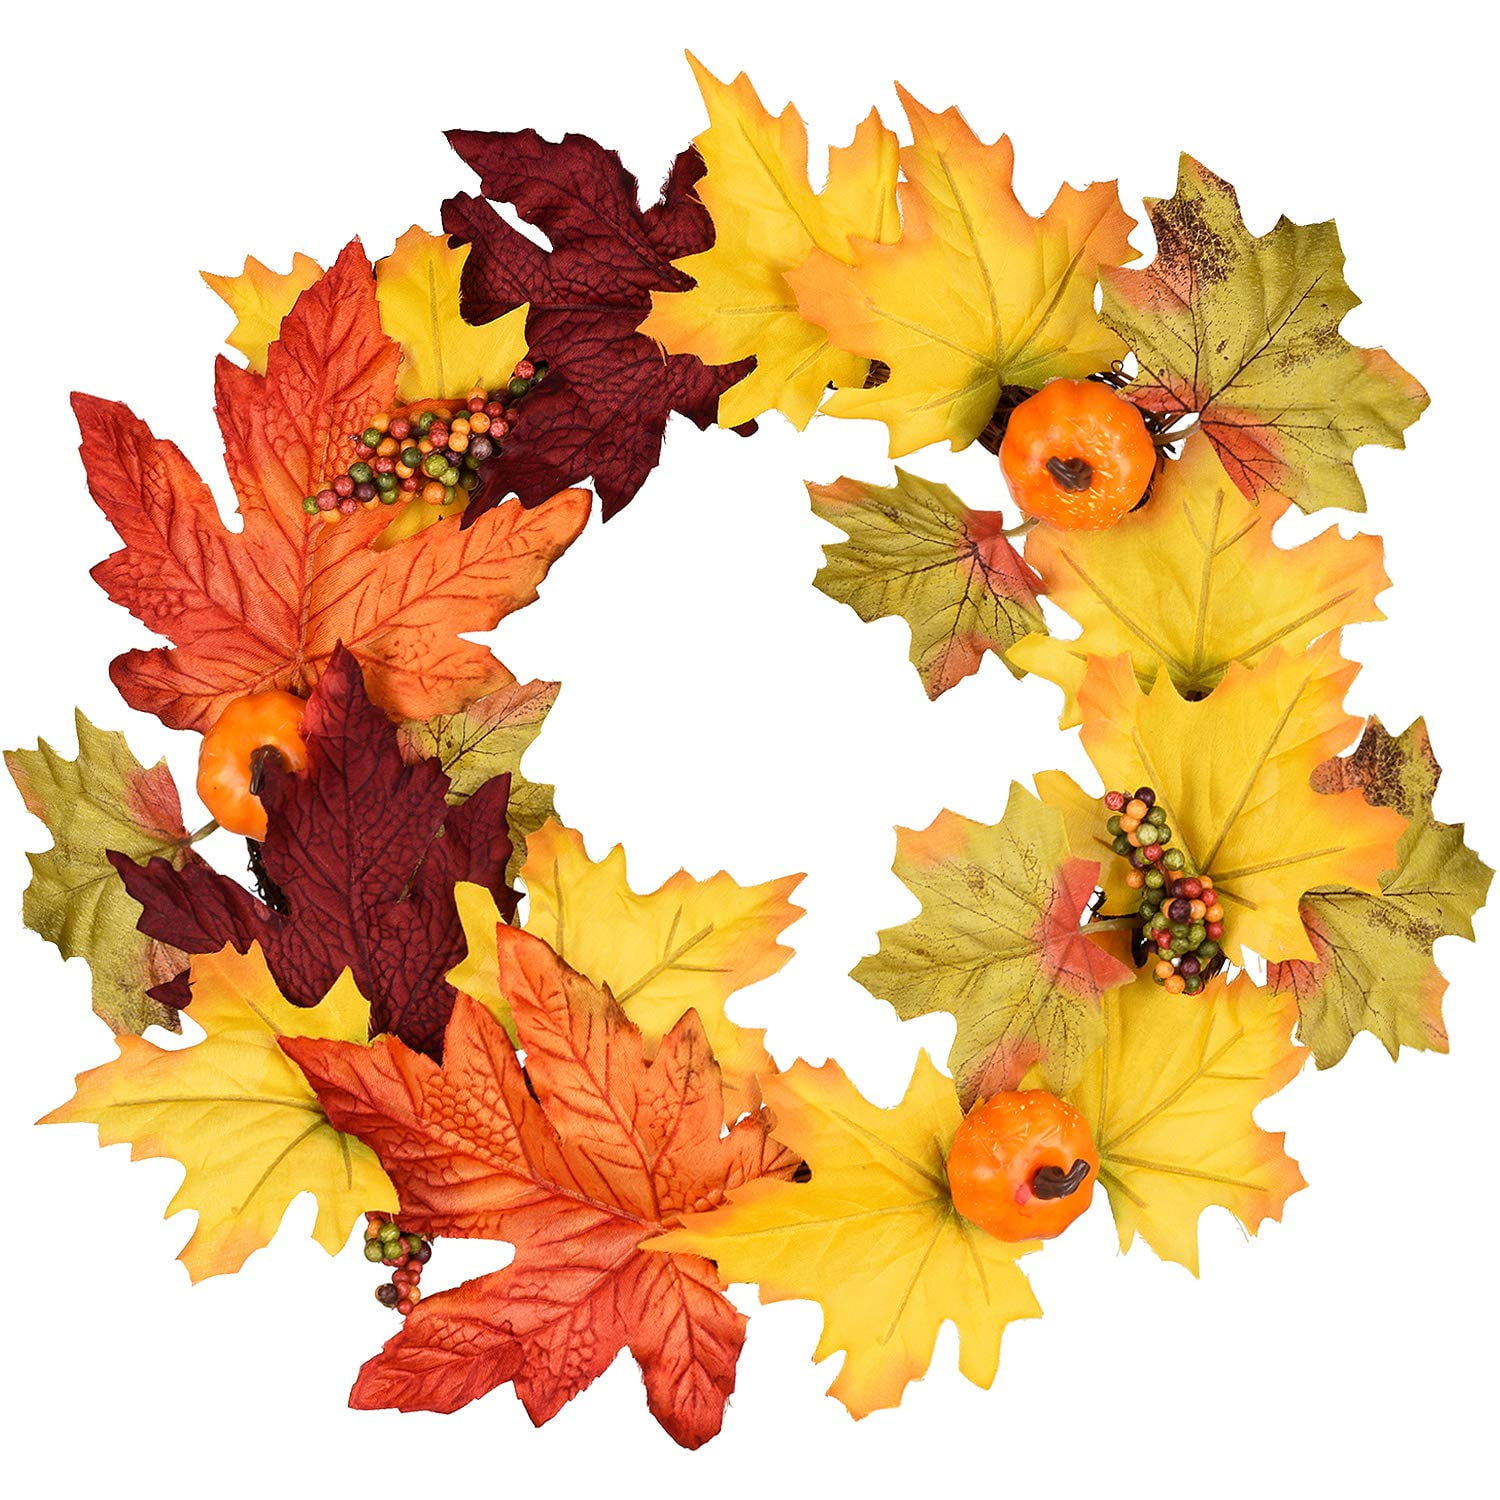 Artificial Autumn Fall Maple Leaves Garland Wall Hanging Plant Wreath Home Decor 